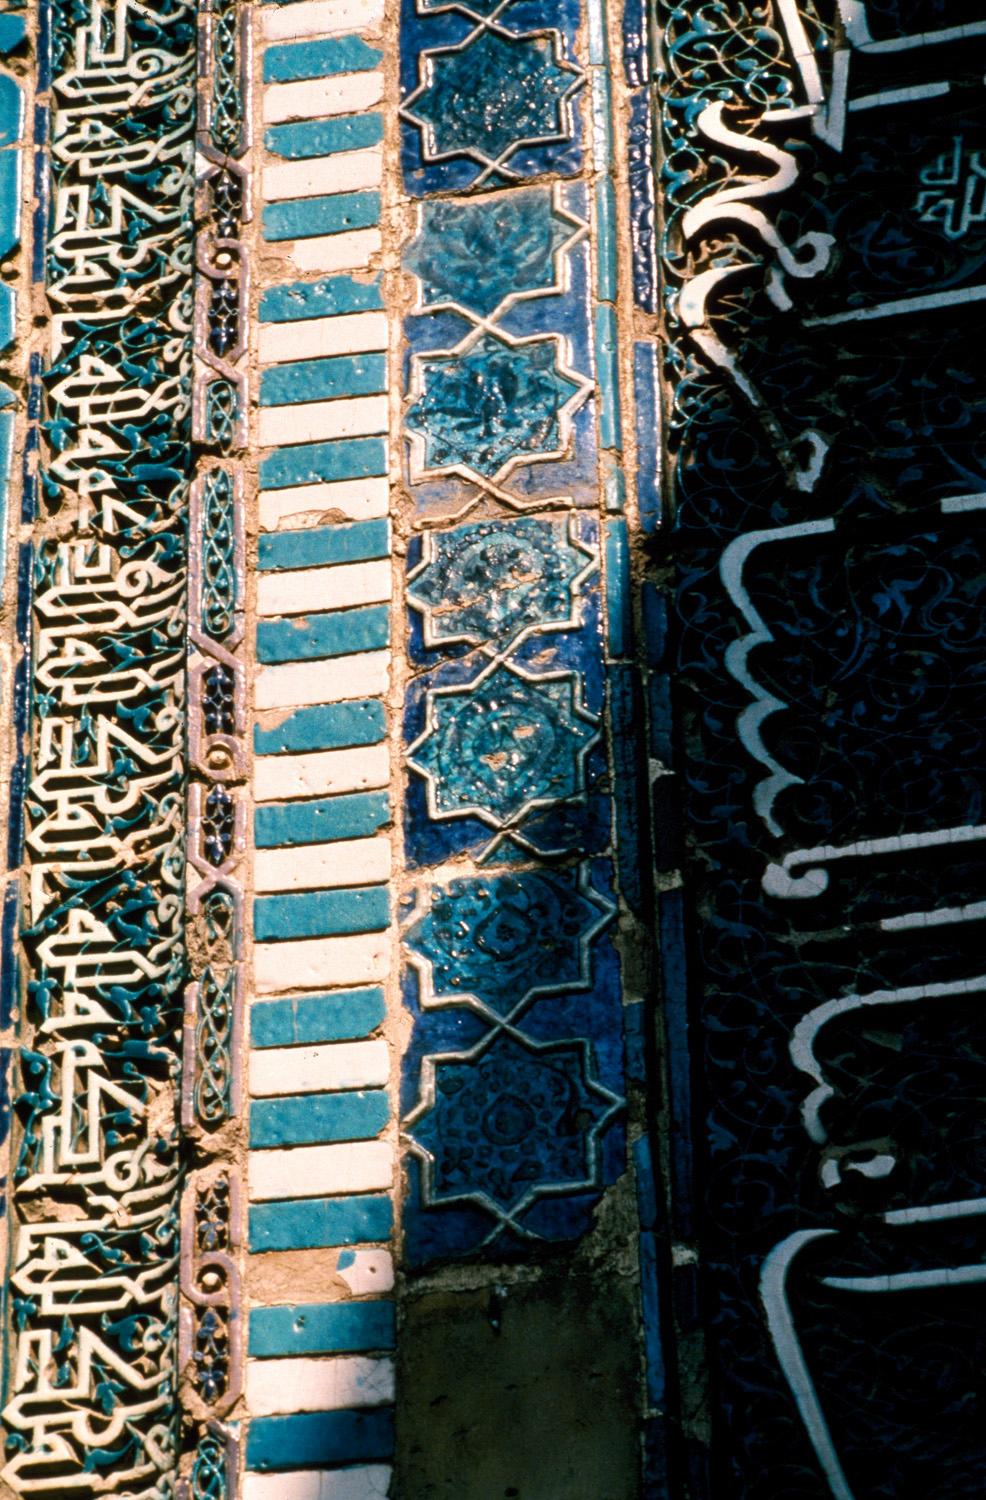 Khwaja Ahmed Mausoleum - Exterior detail from eastern portal showing inscription